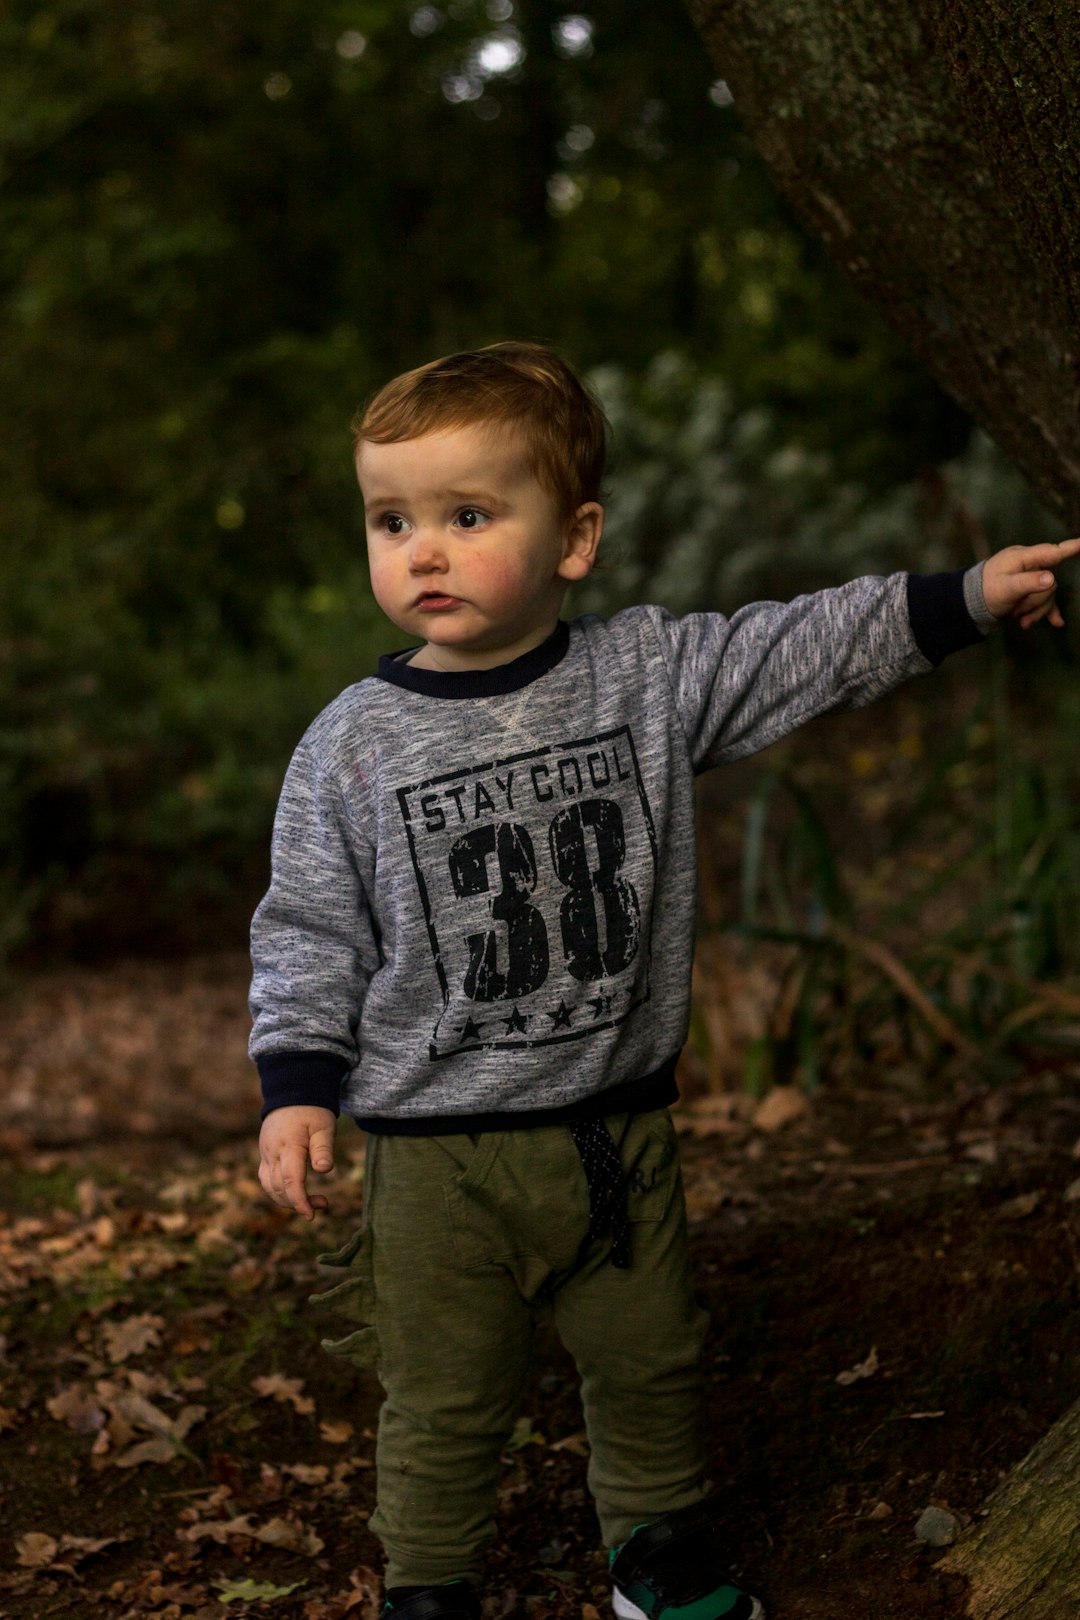 boy in gray sweater standing on brown soil